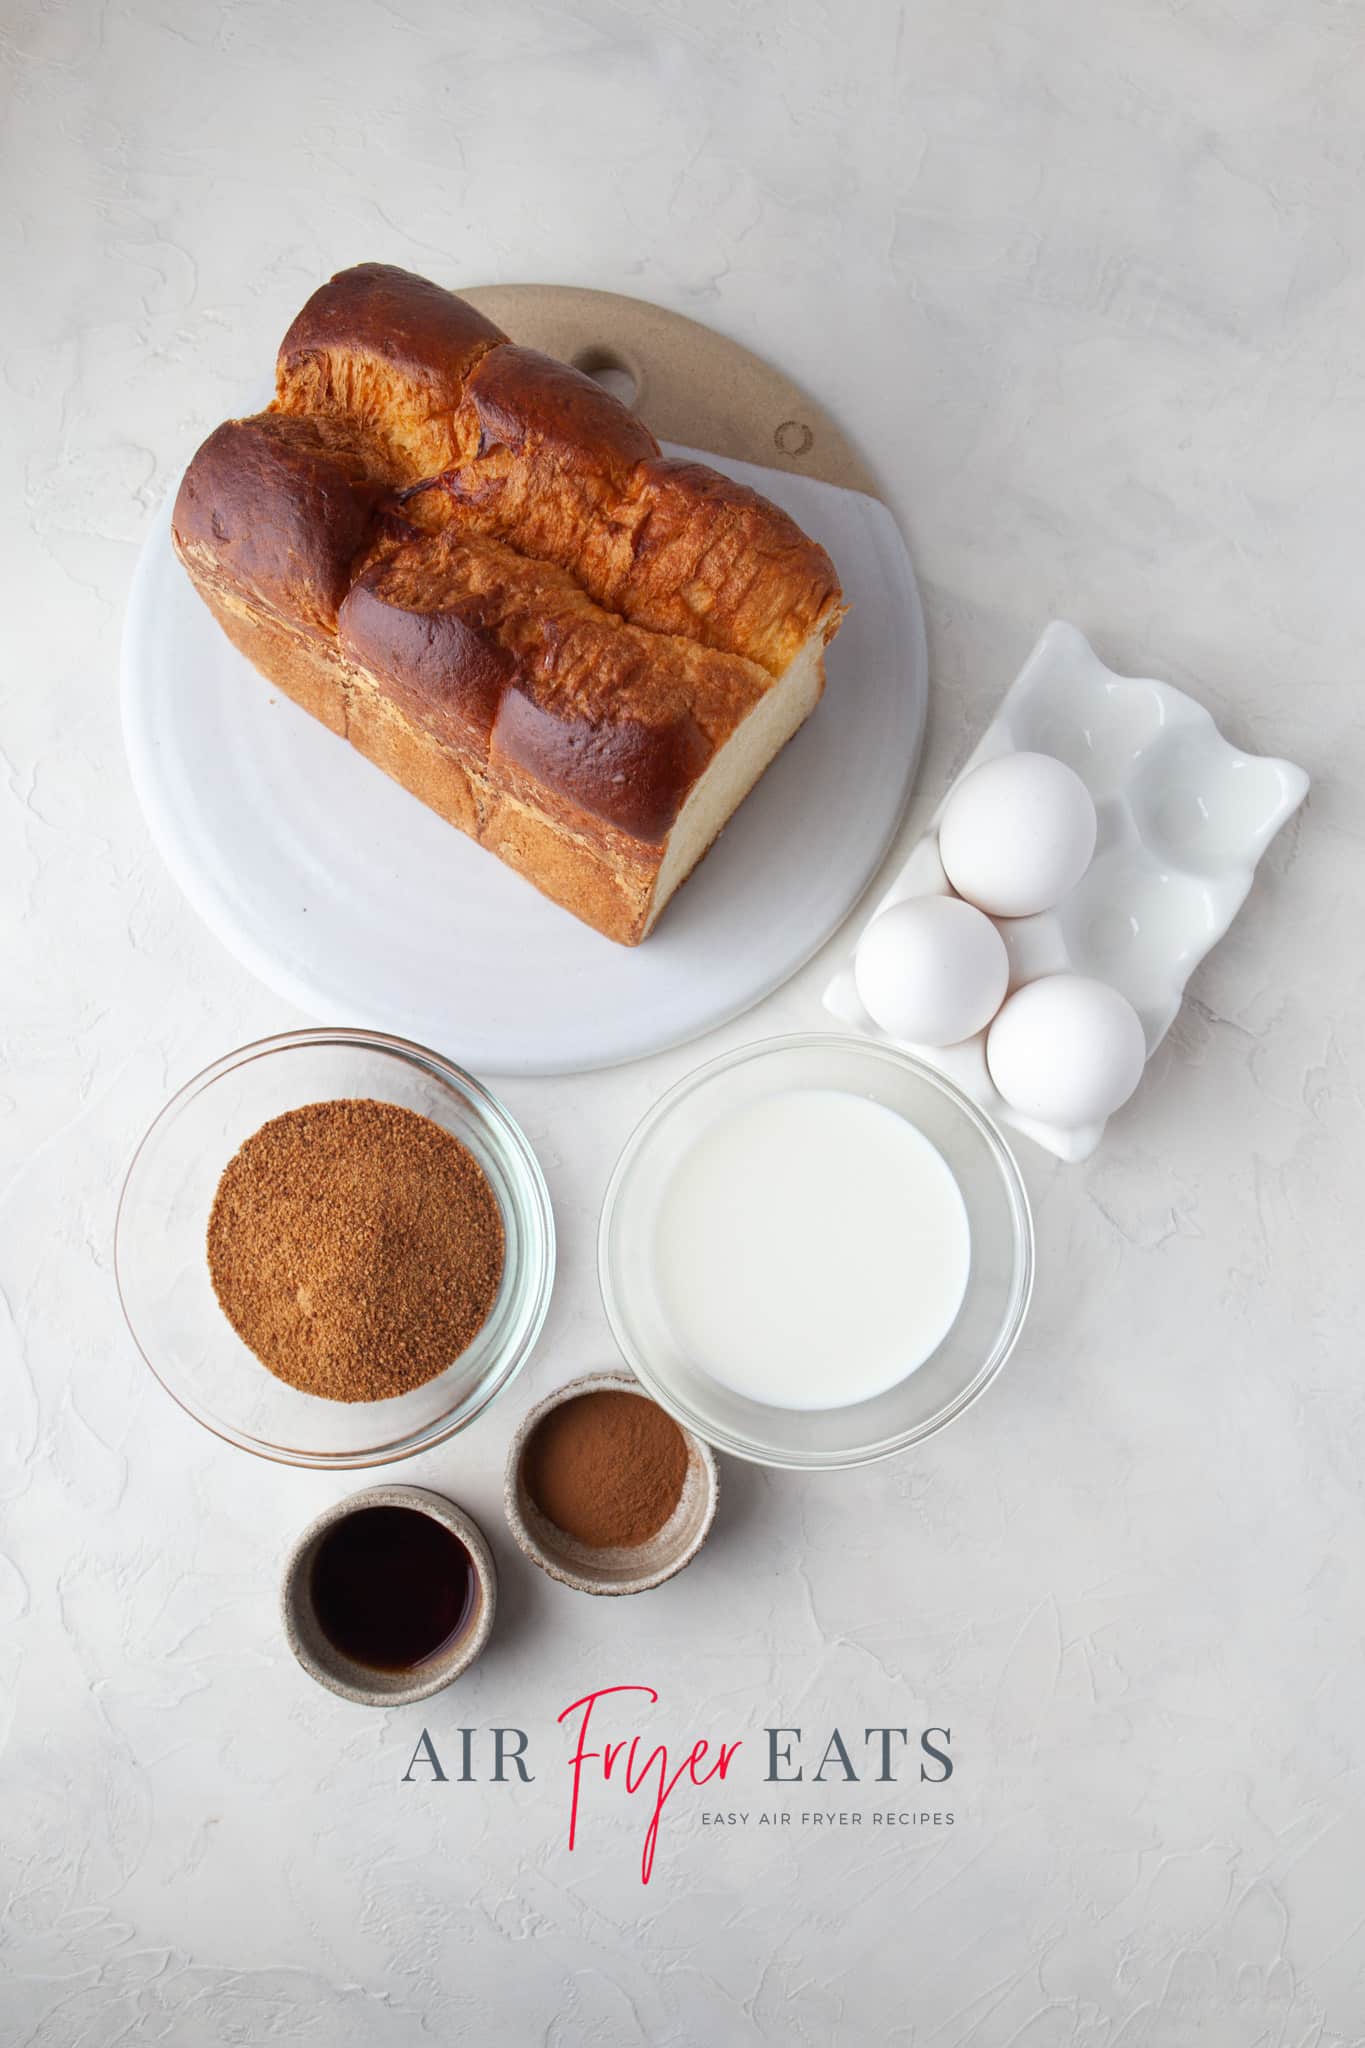 The ingredients needed to make french toast sticks in the air fryer with brioche